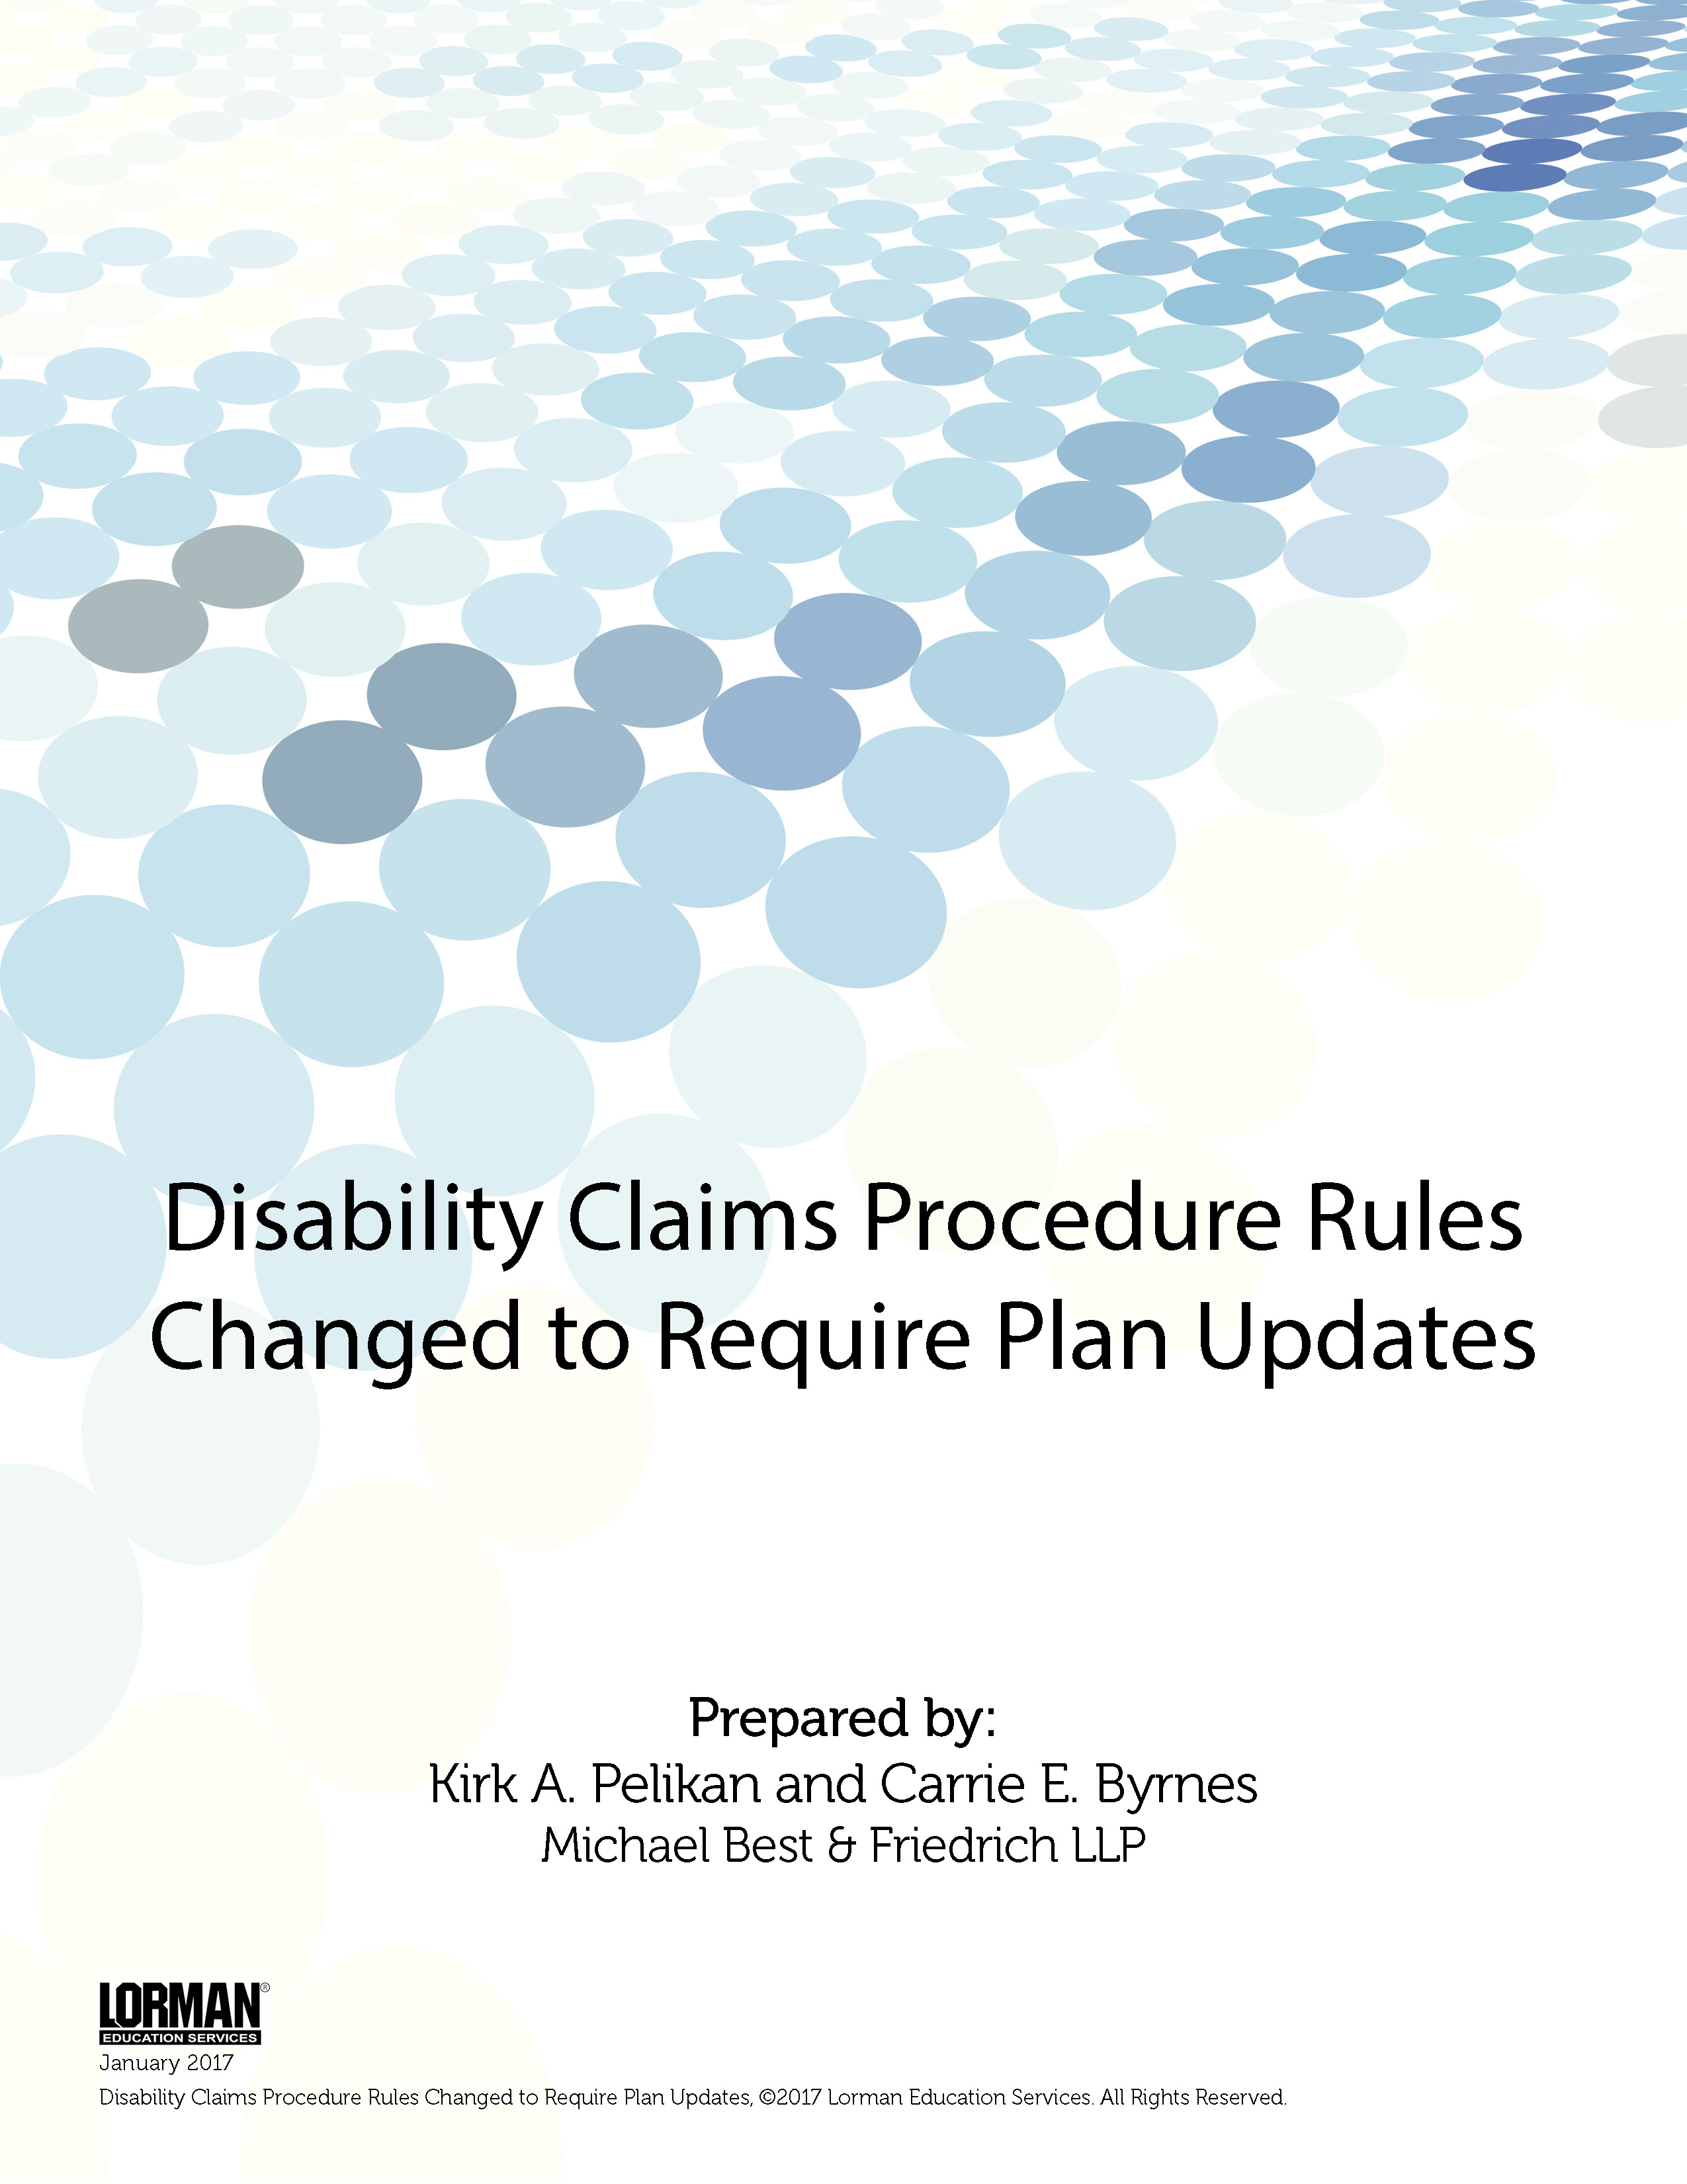 Disability Claims Procedure Rules Changed to Require Plan Updates